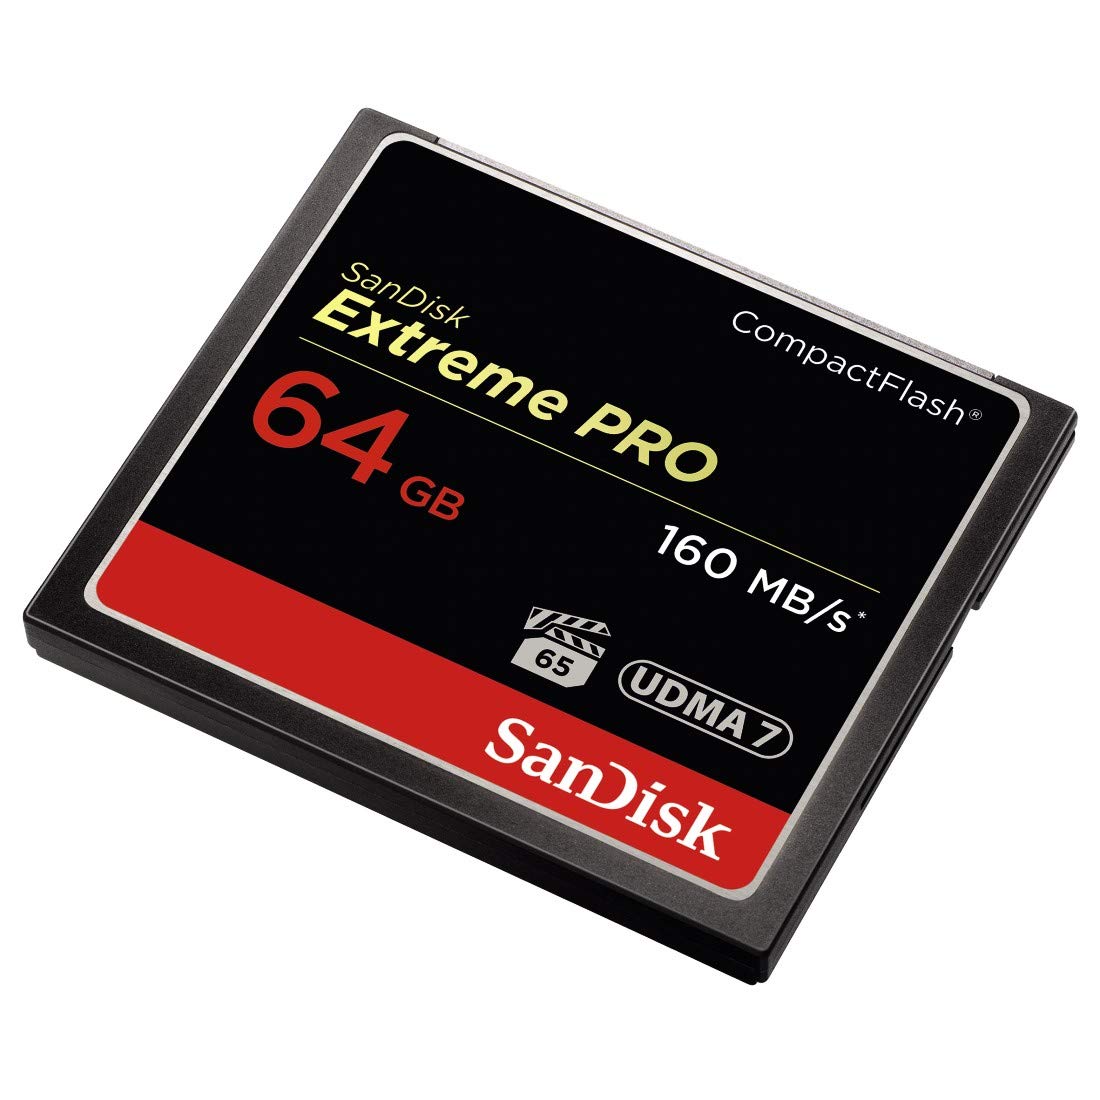 SanDisk Extreme PRO 64GB Compact Flash Memory Card UDMA 7 Speed Up To 160MB/s - SDCFXPS-064G-X46 (Open Box, Like New)